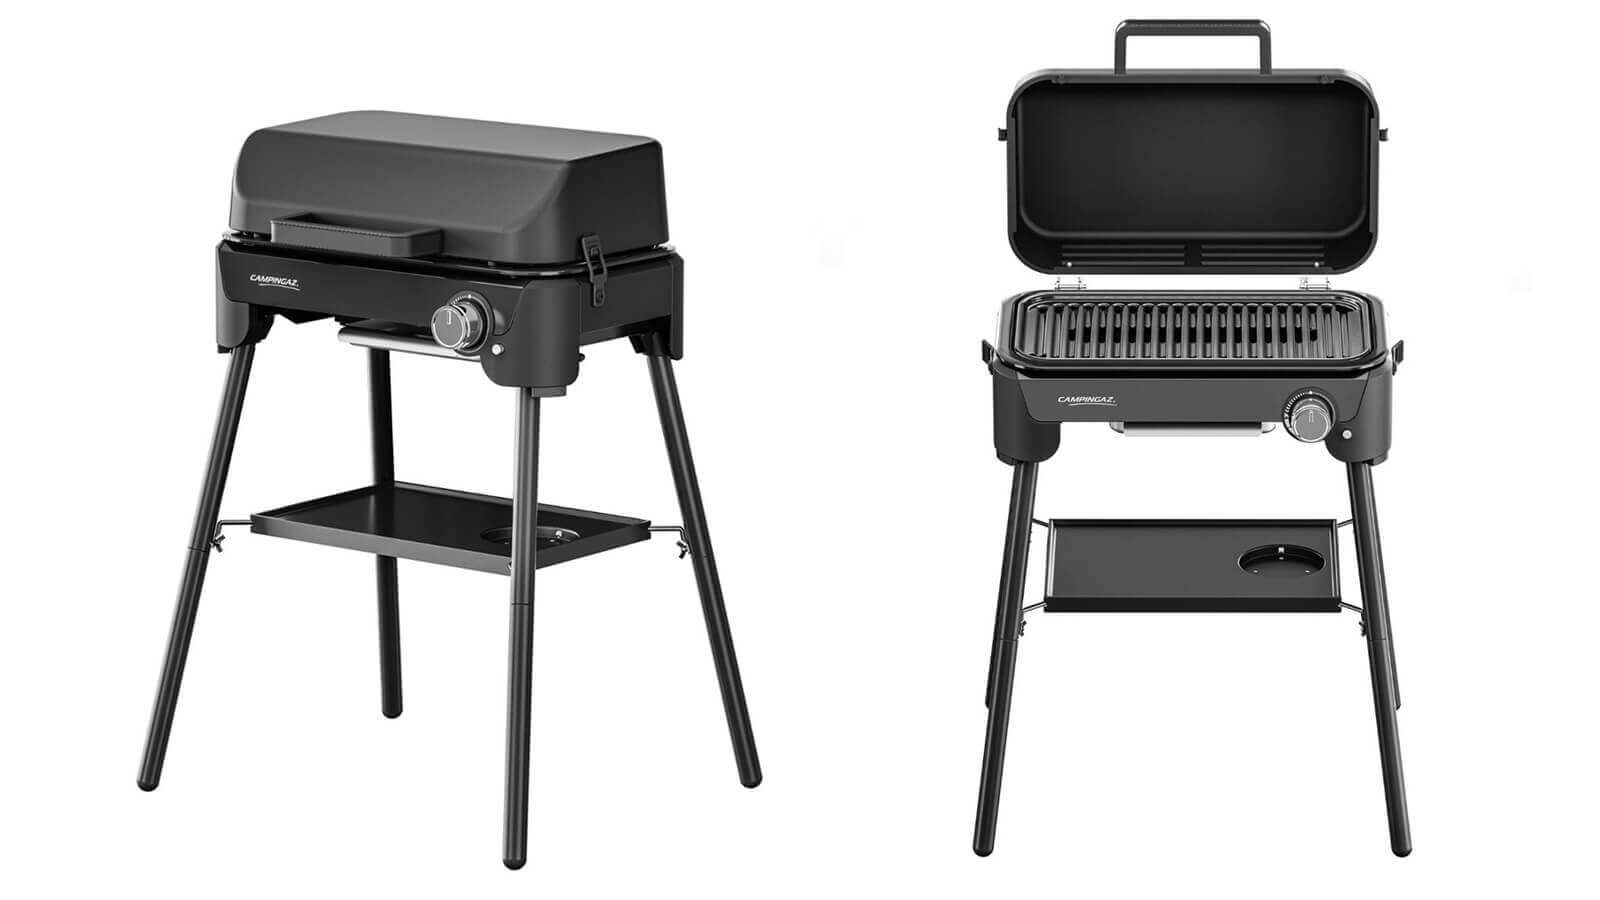 zoom design tour and grill sur pied, barbecue de camping